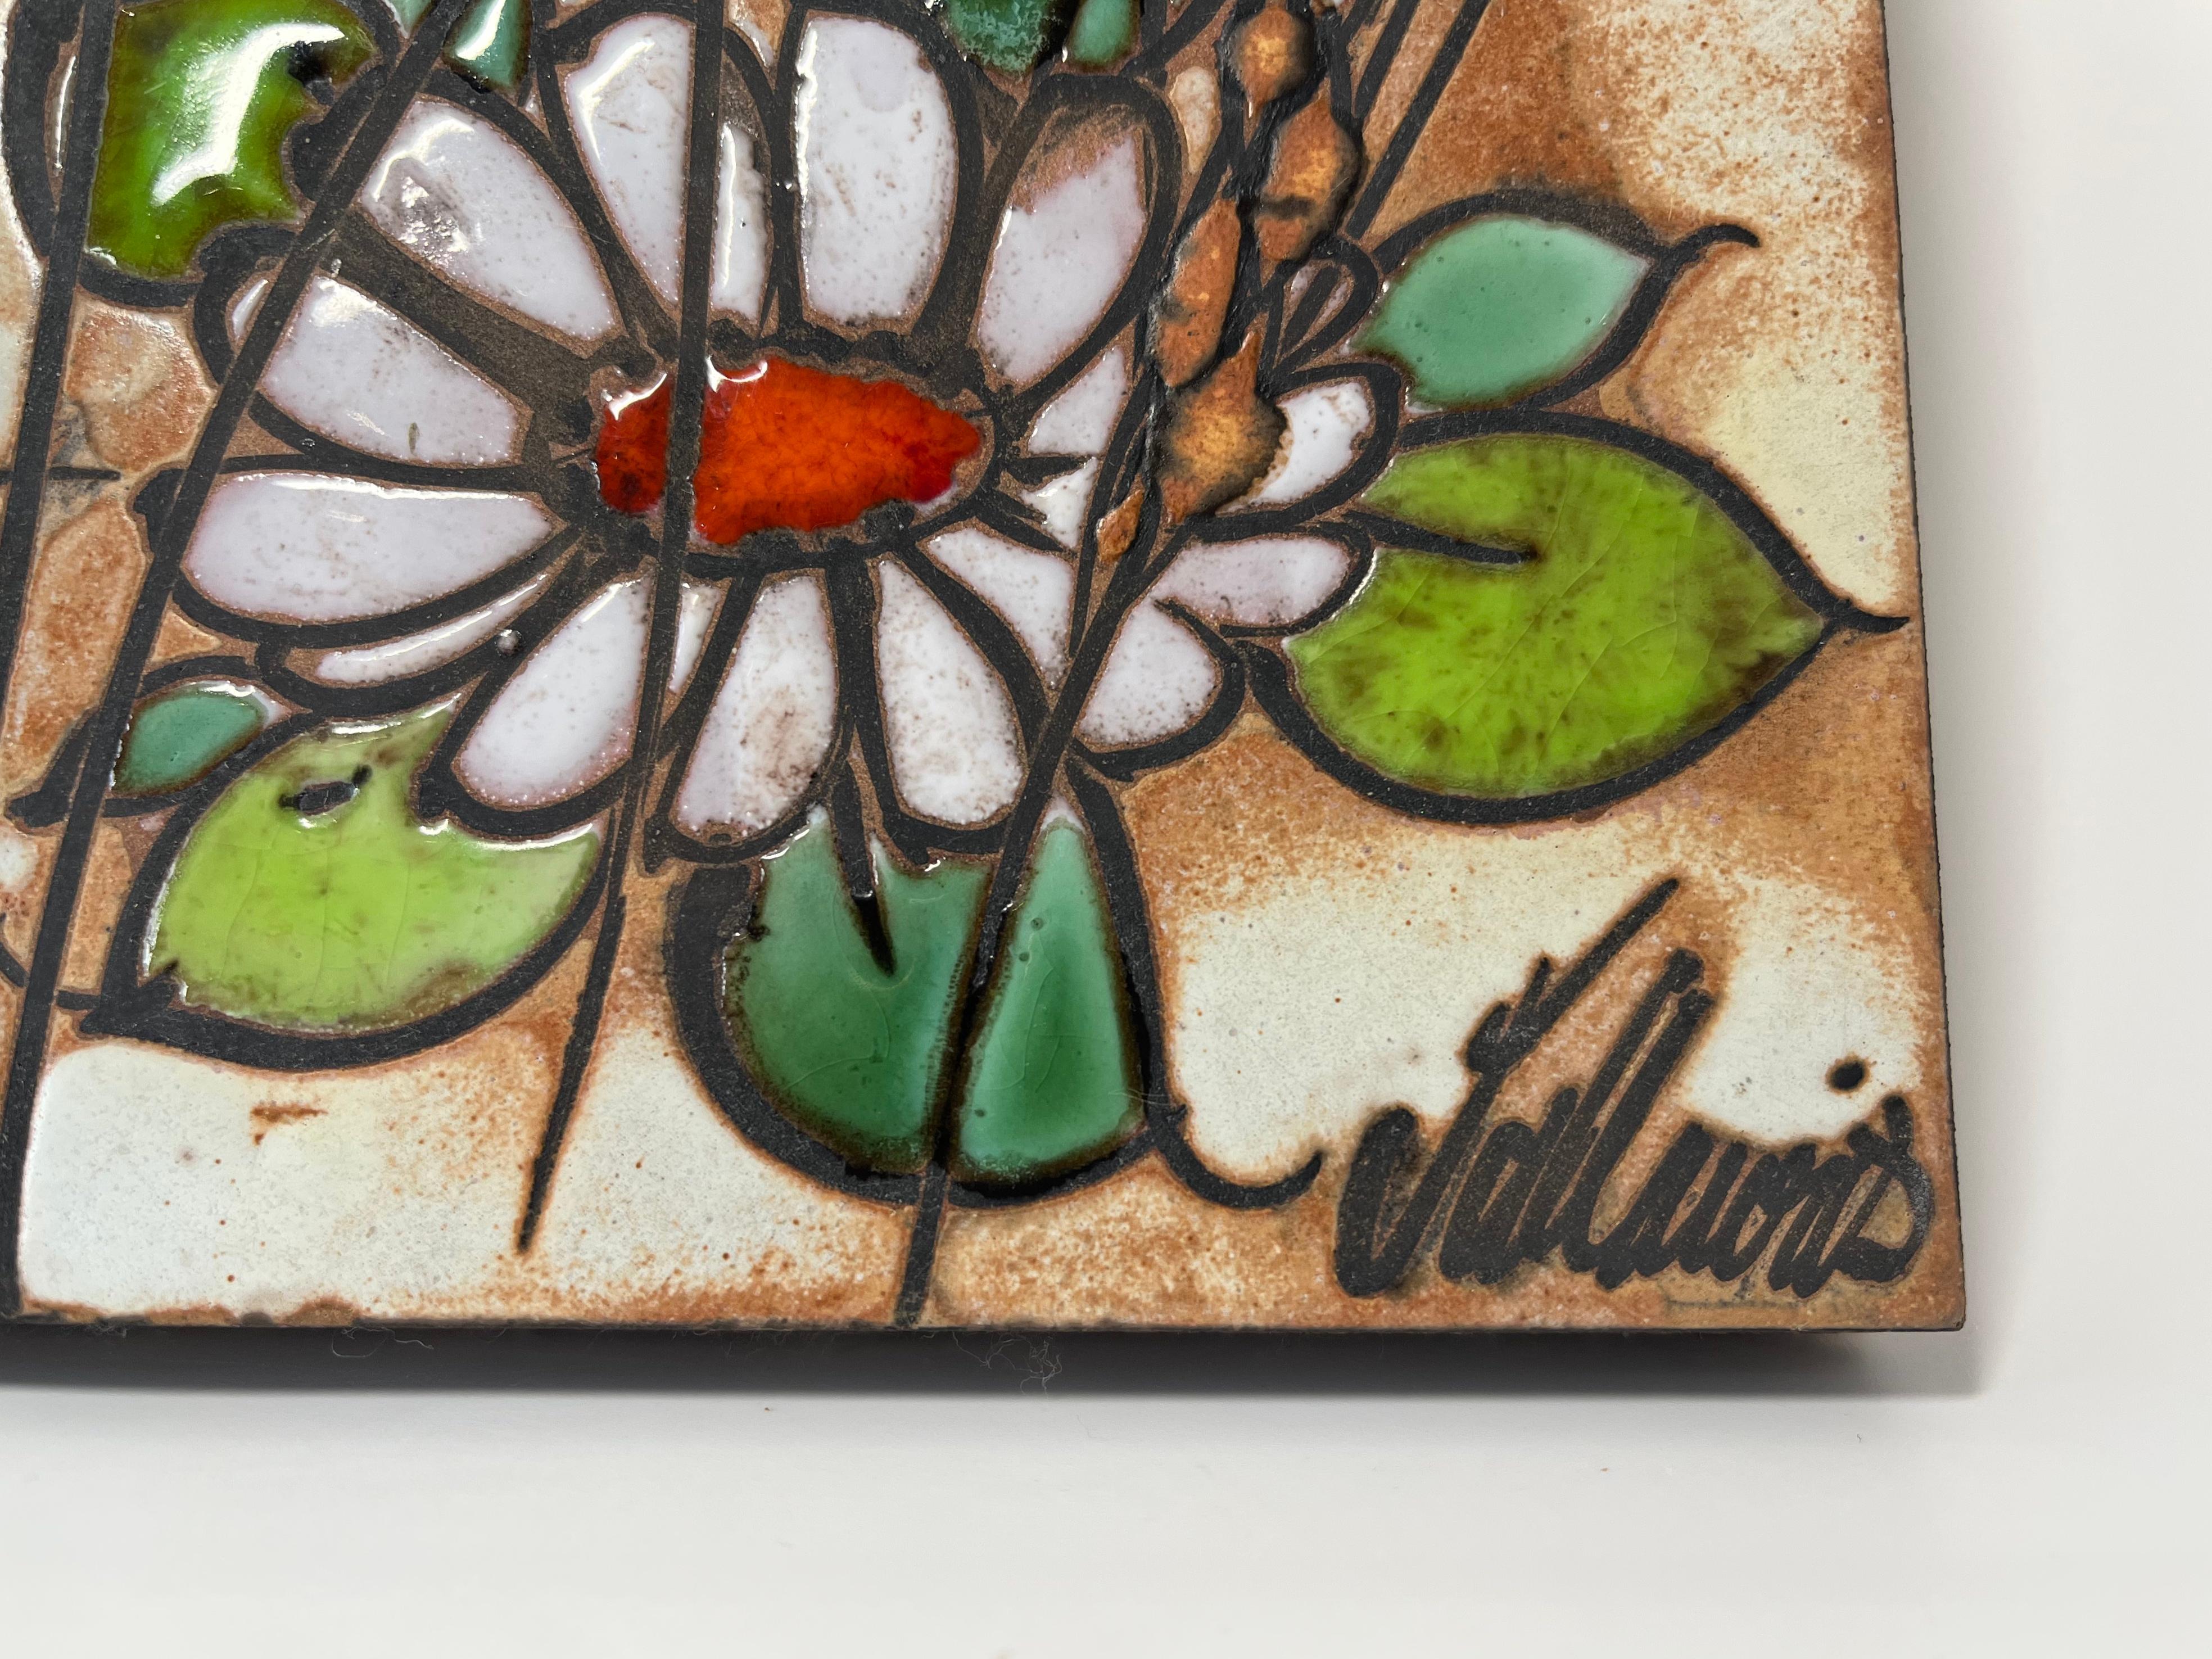 20th Century Songbird and Daisies Vallauris Glazed Ceramic Tiles Enamel Wall Decoration c1960 For Sale